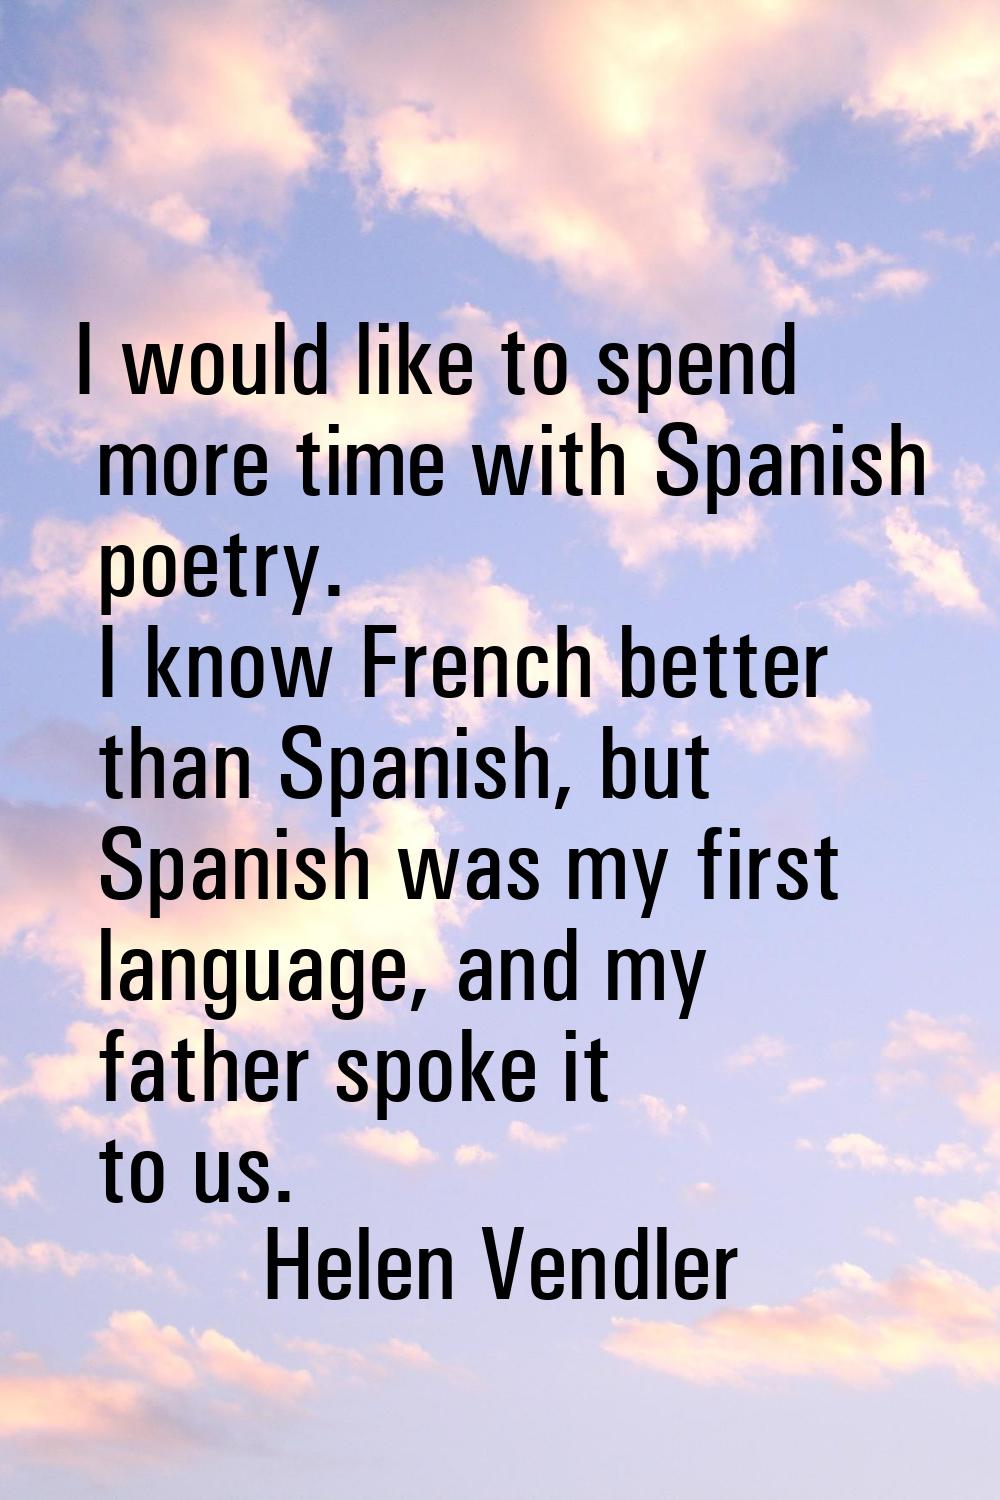 I would like to spend more time with Spanish poetry. I know French better than Spanish, but Spanish